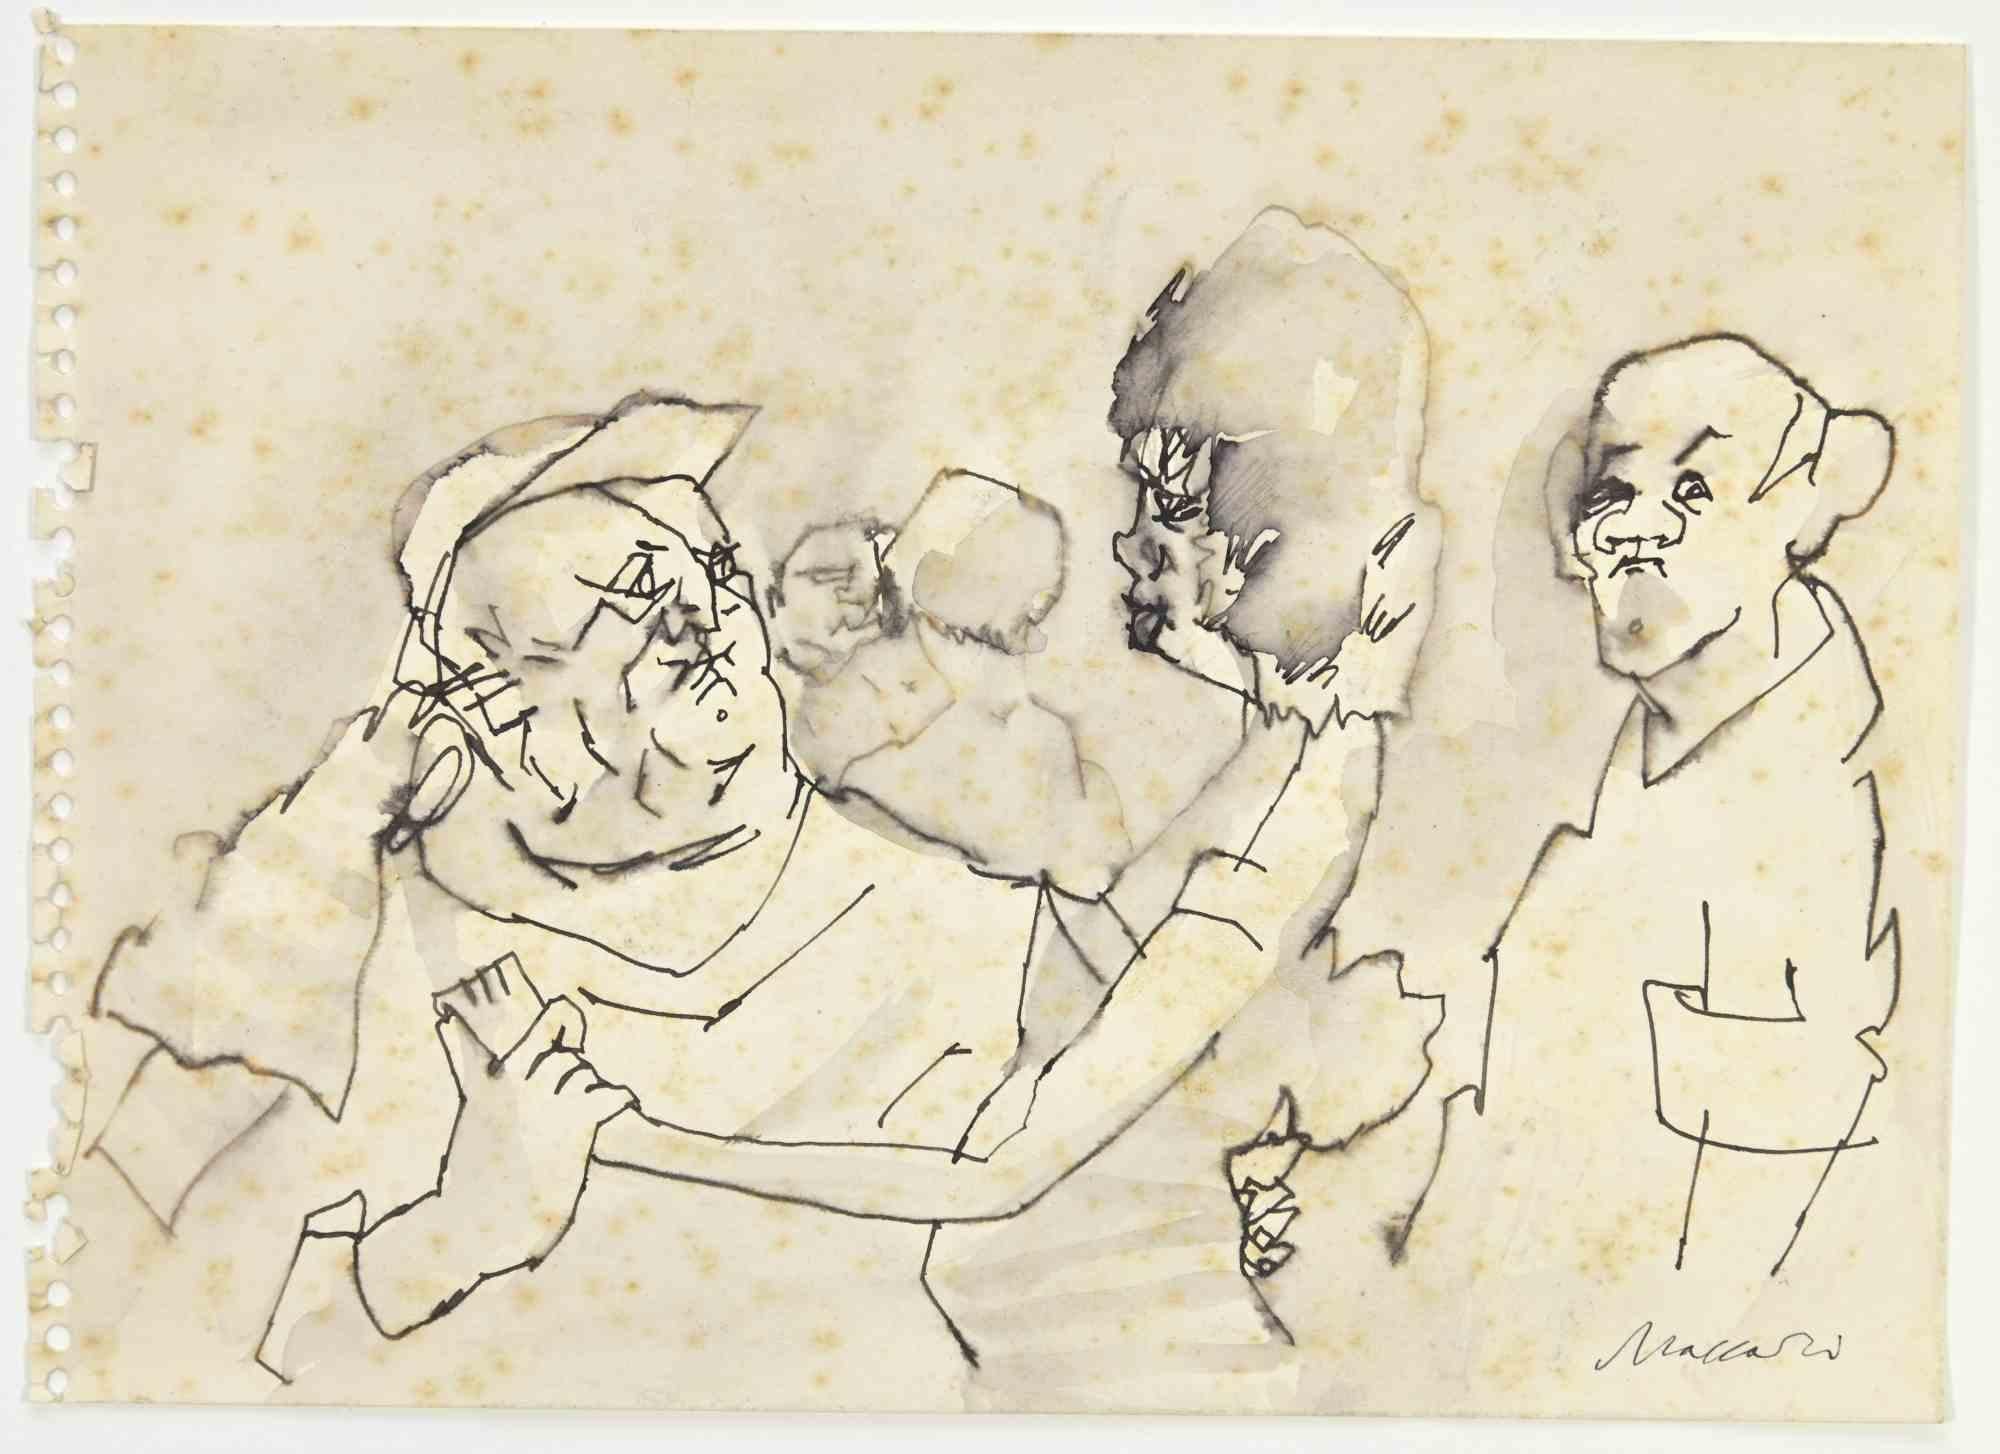 Figures is a Watercolour and Pen Drawing realized by Mino Maccari  (1924-1989) in the 1960s.

Hand-signed on the lower.

Good condition except for some foxing.

Mino Maccari (Siena, 1924-Rome, June 16, 1989) was an Italian writer, painter, engraver